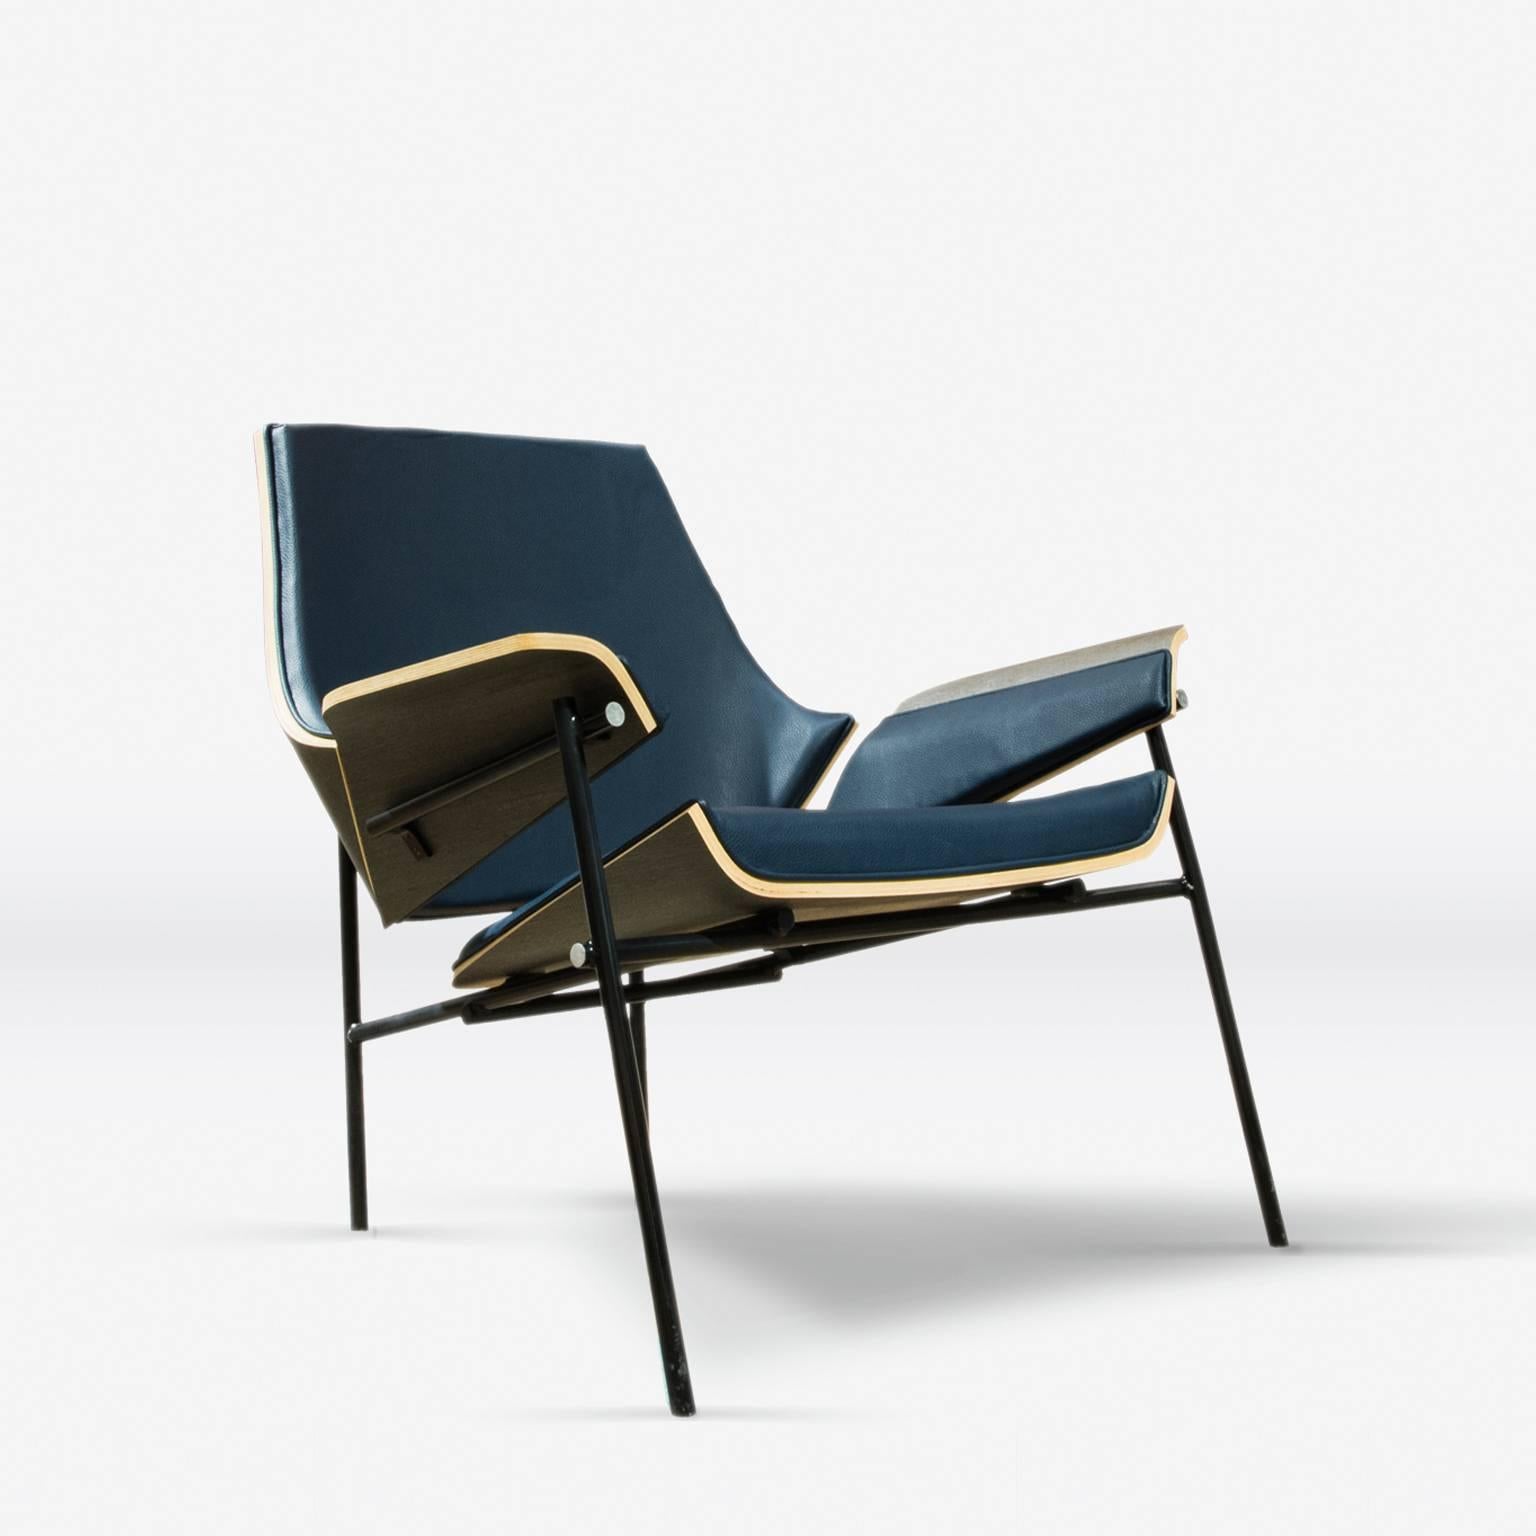 This lounge chair draws inspiration from the iconic “Red & Blue Chair,” from Gerrit Rietveld and mixing this with a wood bending technique developed by LEFT, Victor Aleman design, combines 3D modeling and Handmade wood shaping to create a modernist